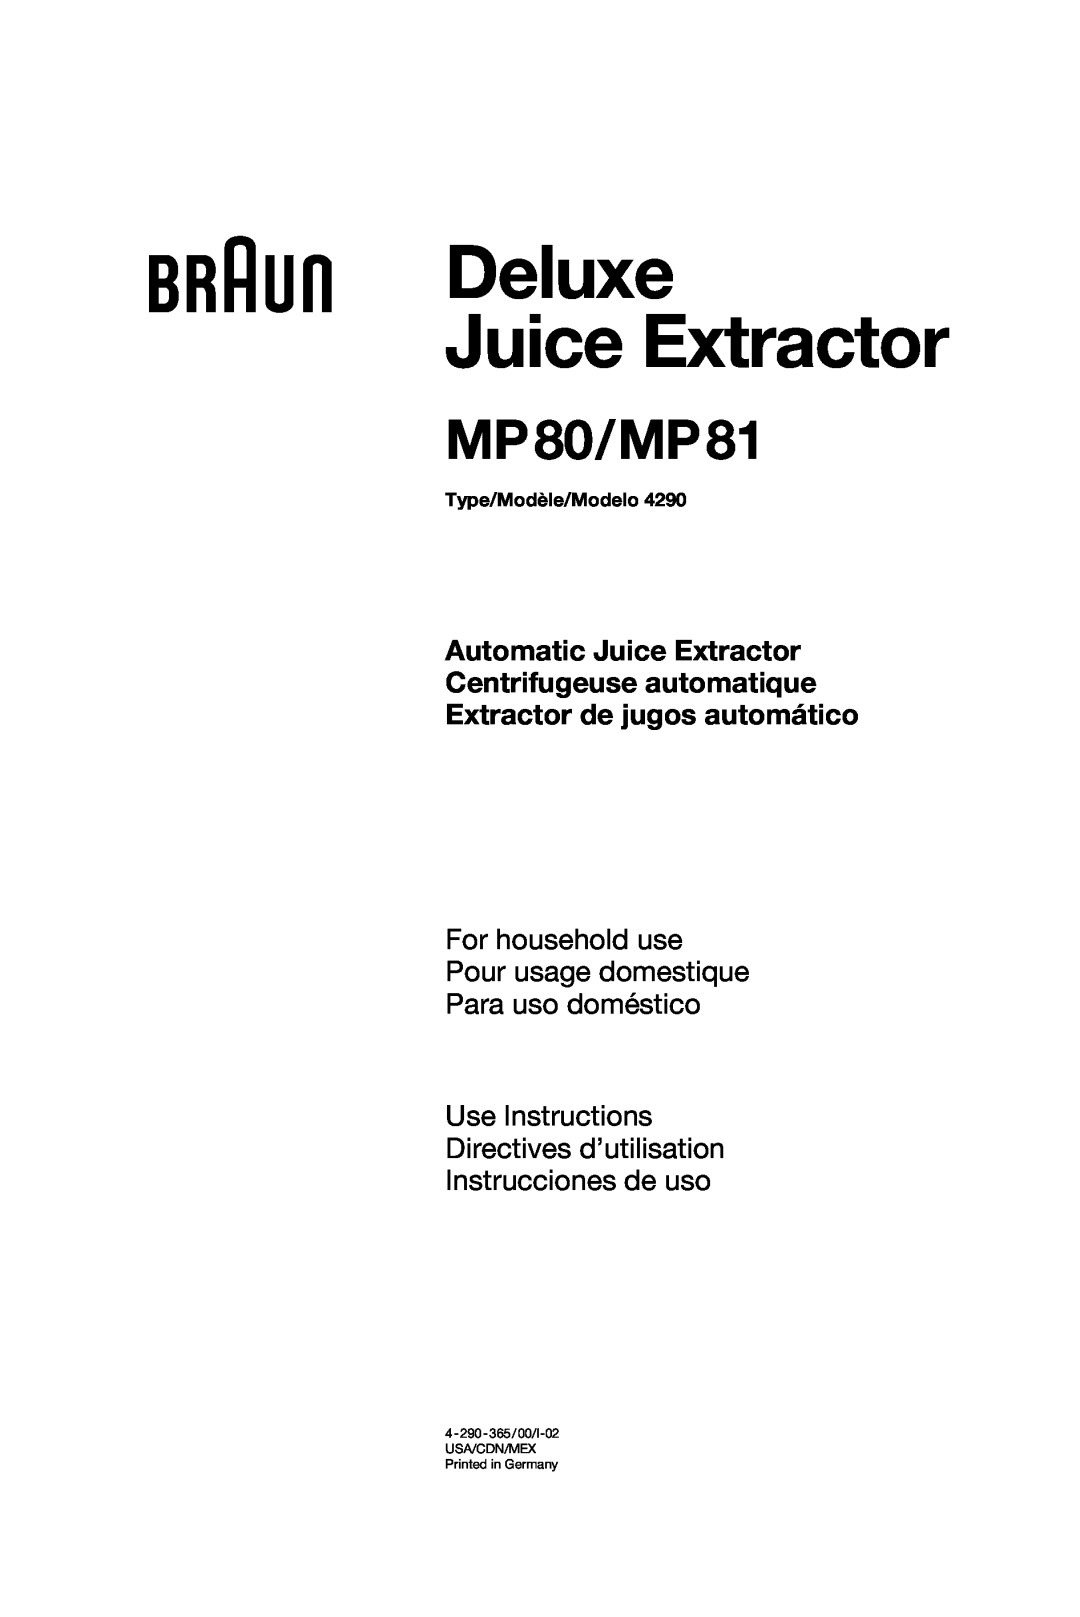 Braun MP81 manual Deluxe Juice Extractor, MP 80/MP, For household use Pour usage domestique, Type/Modèle/Modelo 